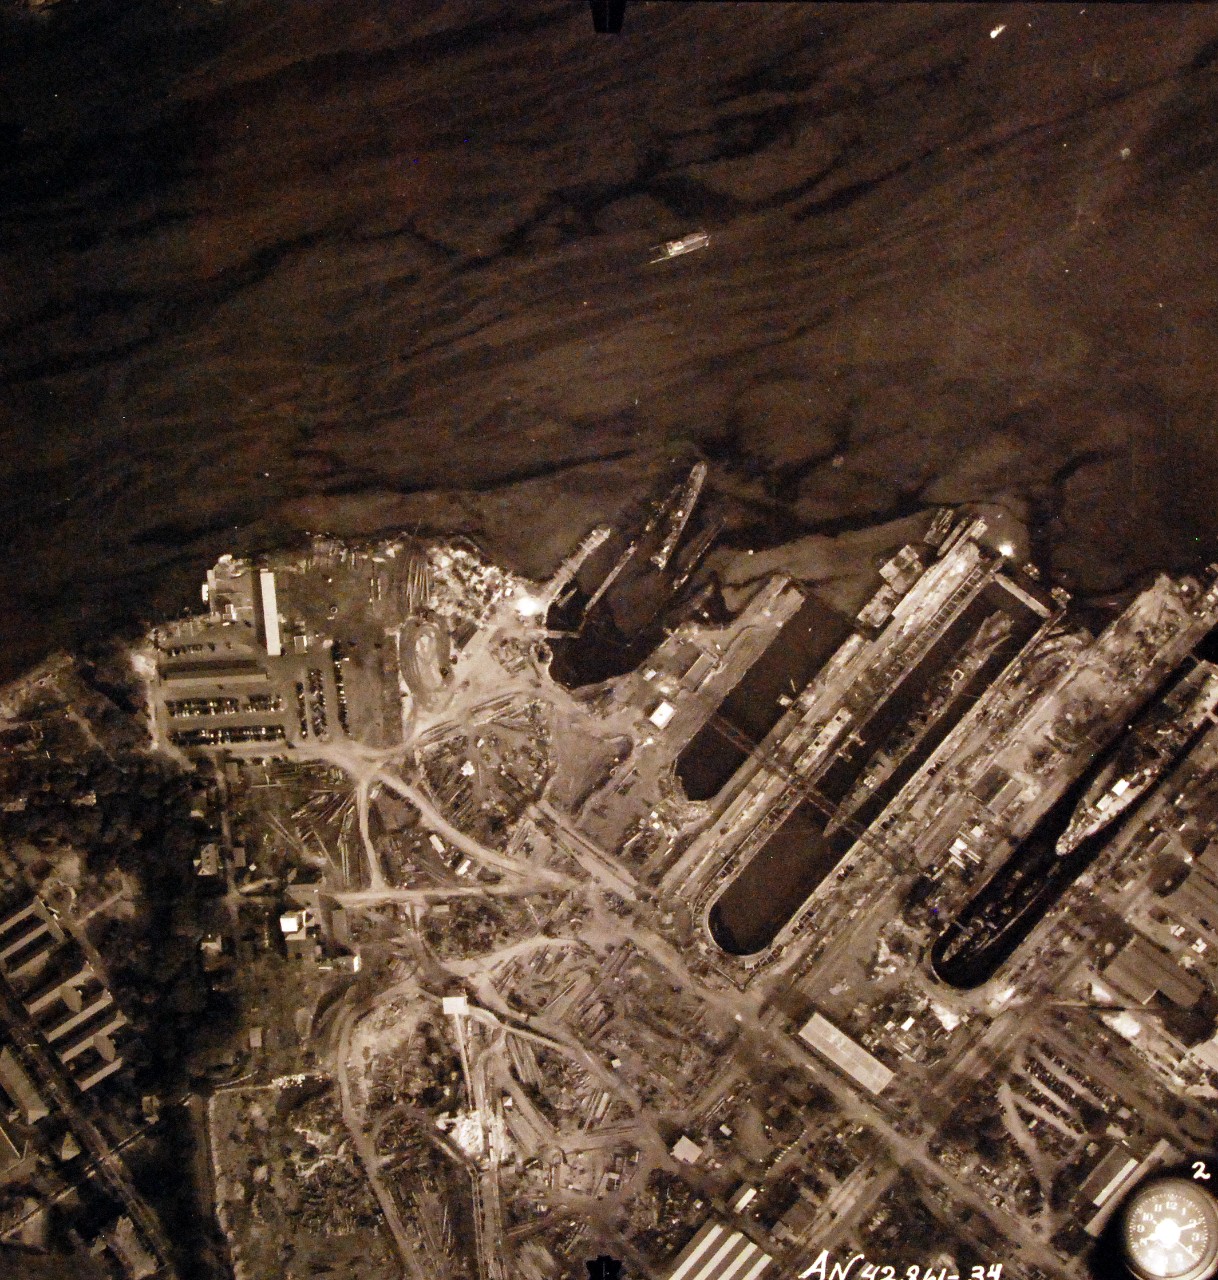 80-G-387594:  Pearl Harbor Attack, 7 December 1941.  Aerial view of "Battleship Row" moorings on the southern side of Ford Island, 10 December 1941, showing damage from the Japanese raid three days earlier.  Ships shown are, (right to left):  USS Pennsylvania (BB 38); USS Cassin (DD 372); USS Downes (DD 375); USS Helena (CL 50) and USS Shaw (DD 373).  Note dark oil streaks on the harbor surface, originating from the sunken battleships. Photographed by VJ-1 at an altitude of 3,000 feet and released November 9, 1950. U.S. Navy photograph, now in the collections of the National Archives.       (9/22/2015).